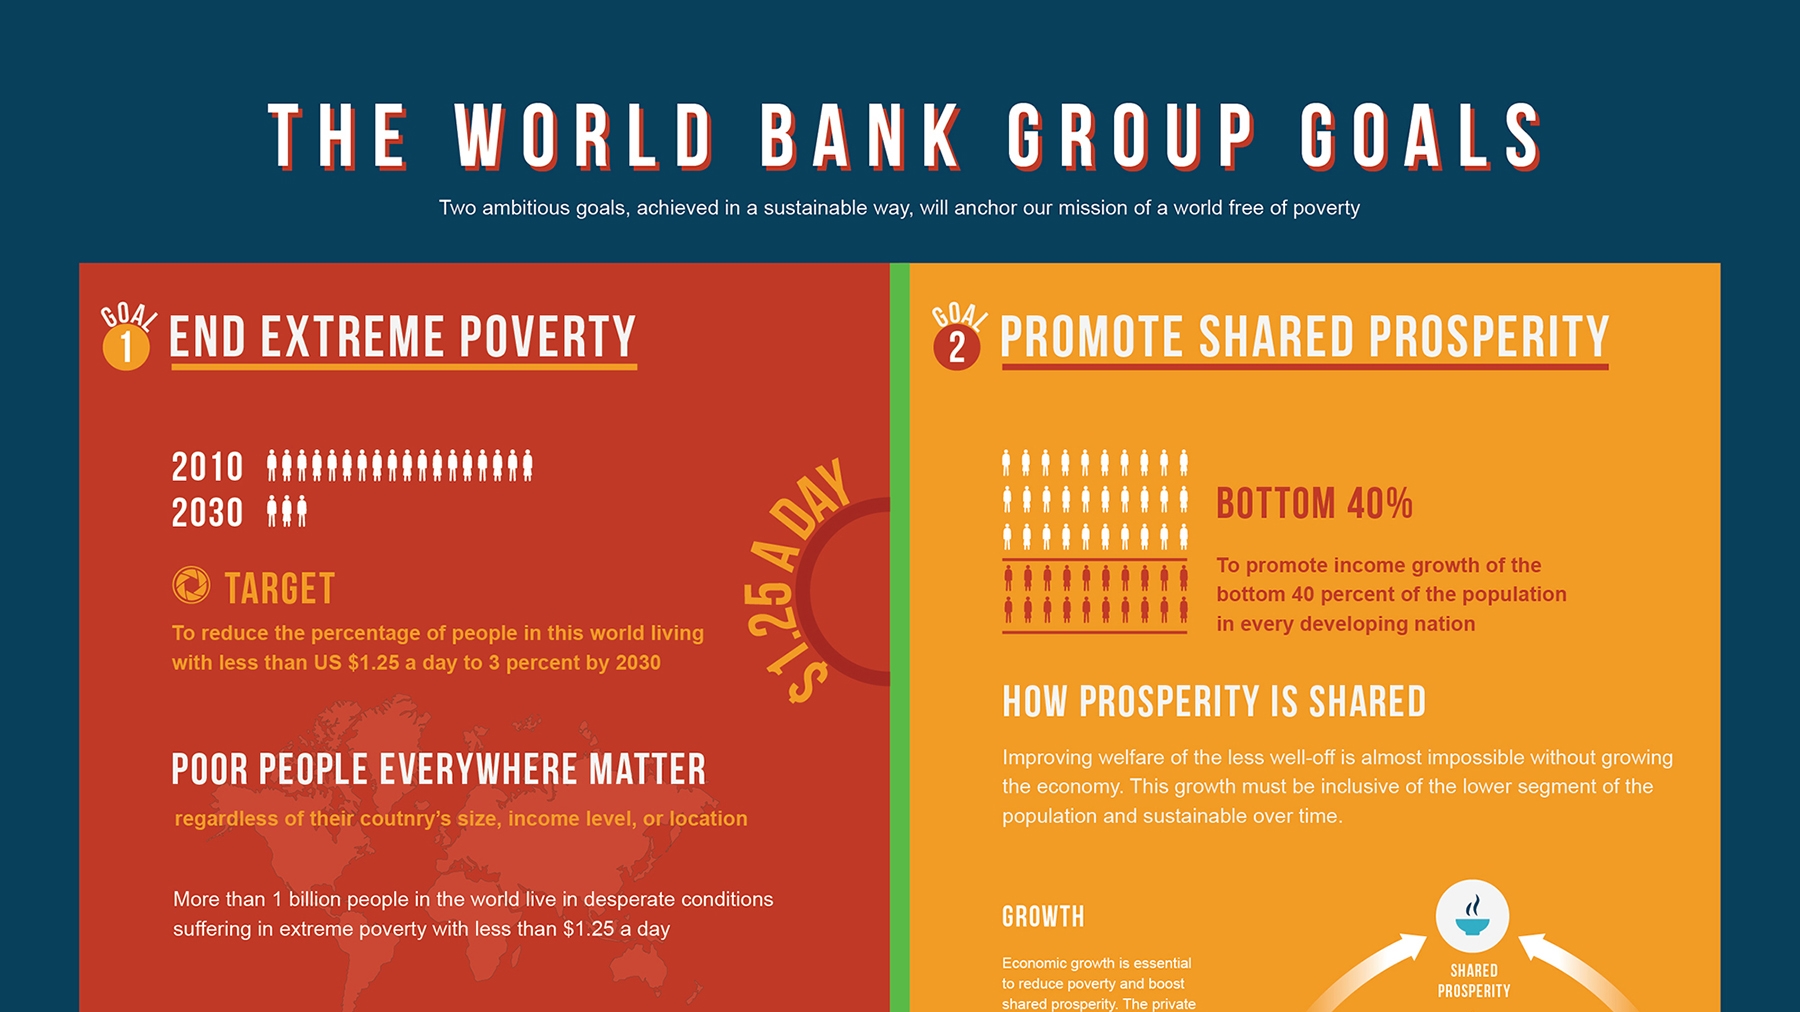 world bank group travel procedure and guidance